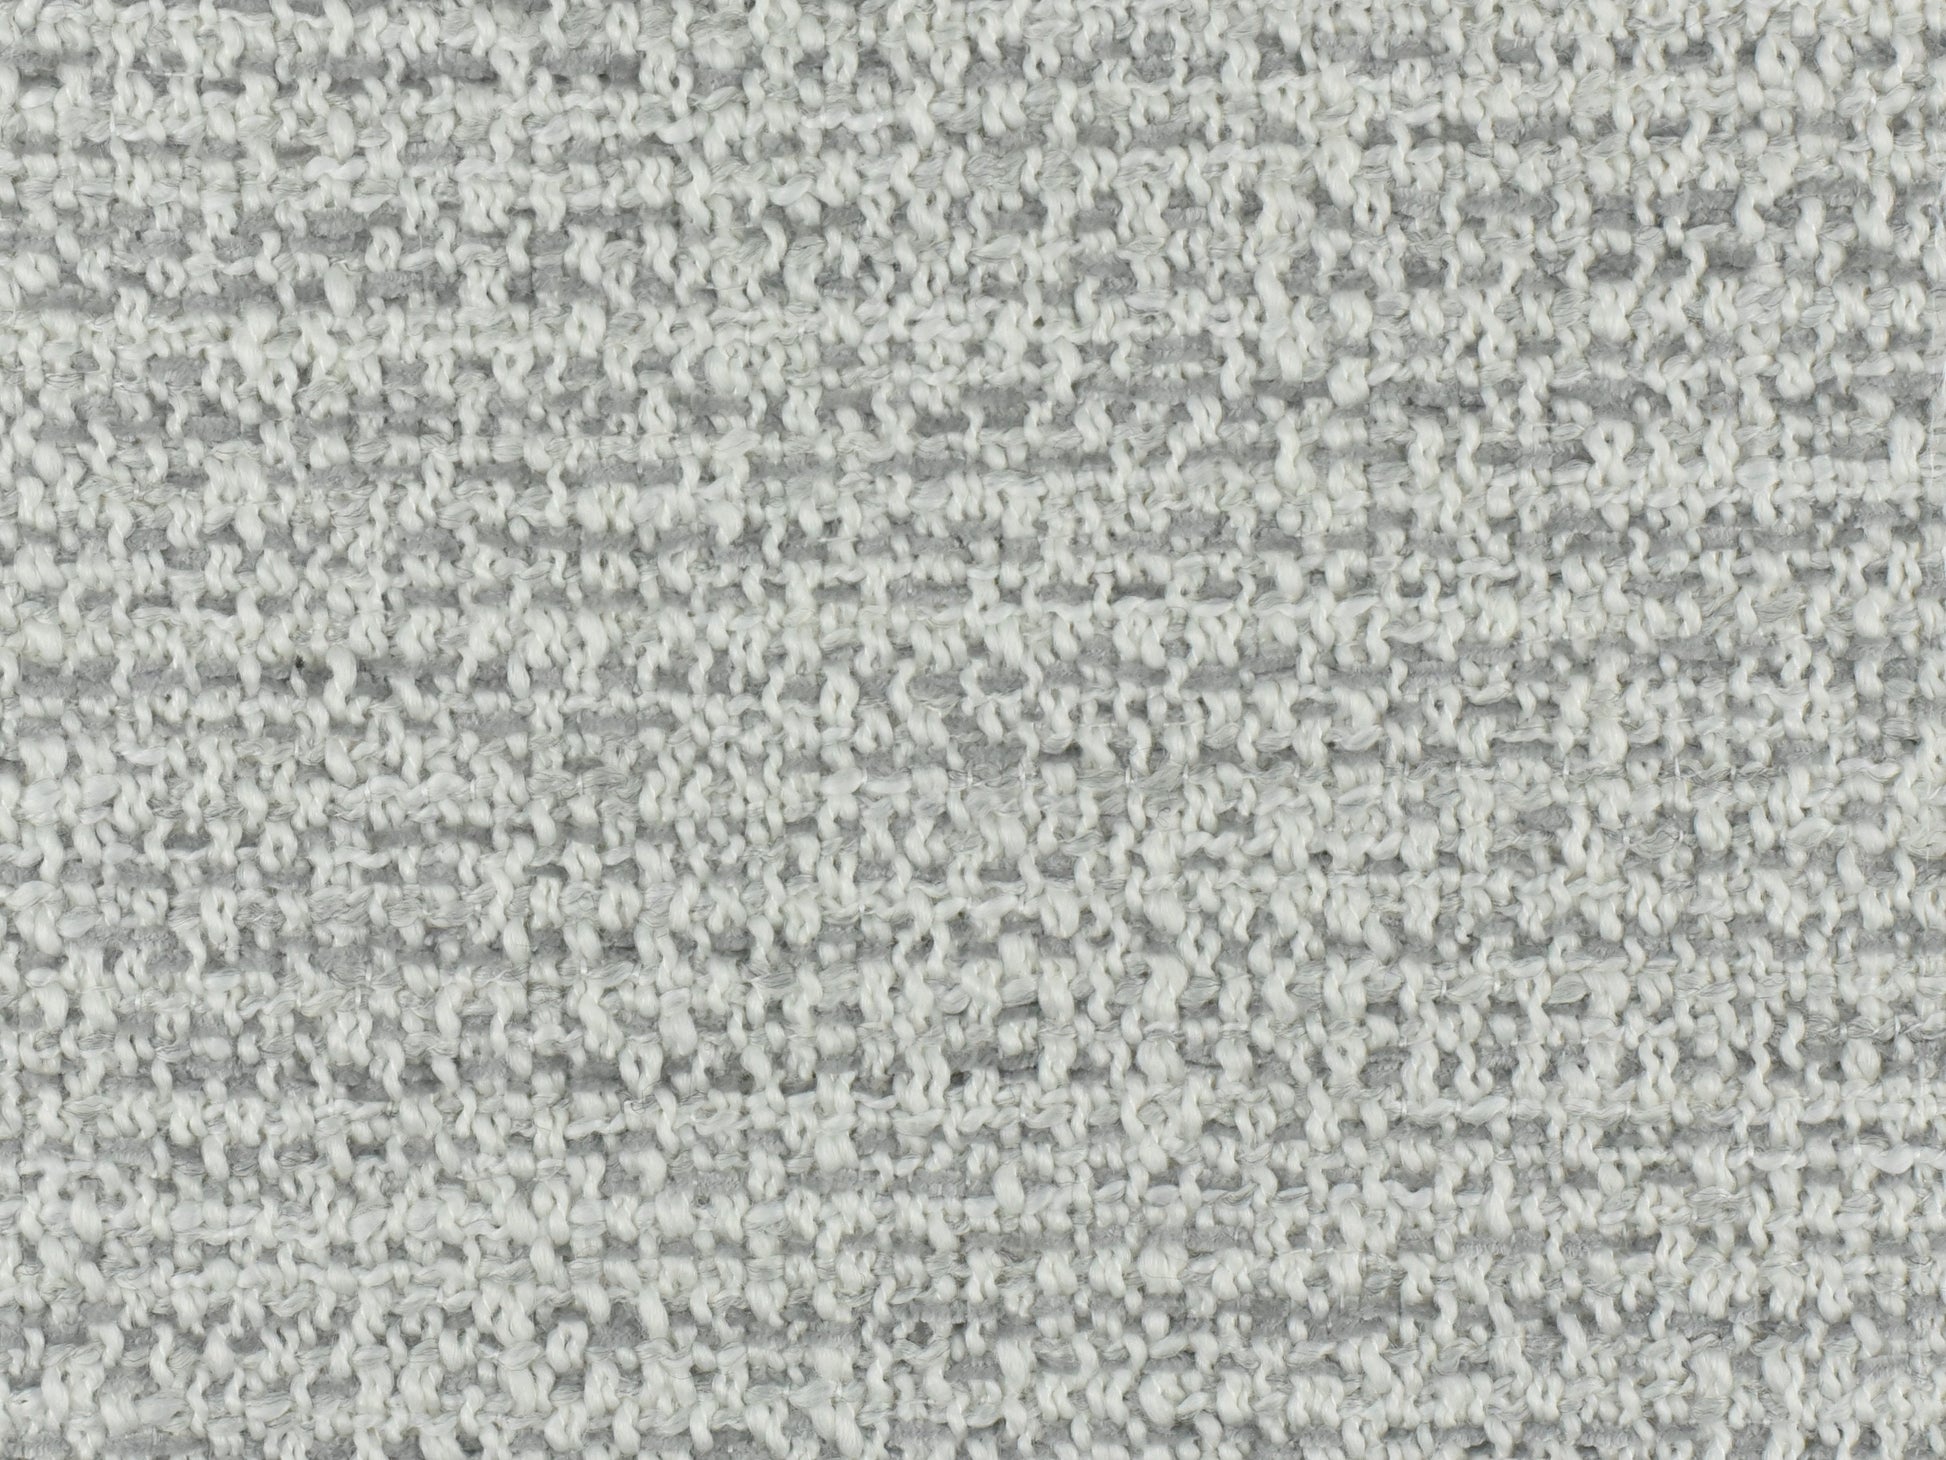 Durable and Heavy Black and White Woven Upholstery Fabric |Dual-Color Home Decor Upholstery Fabric For Chair|Fabric By The Yard-780g/sqm Light Gray